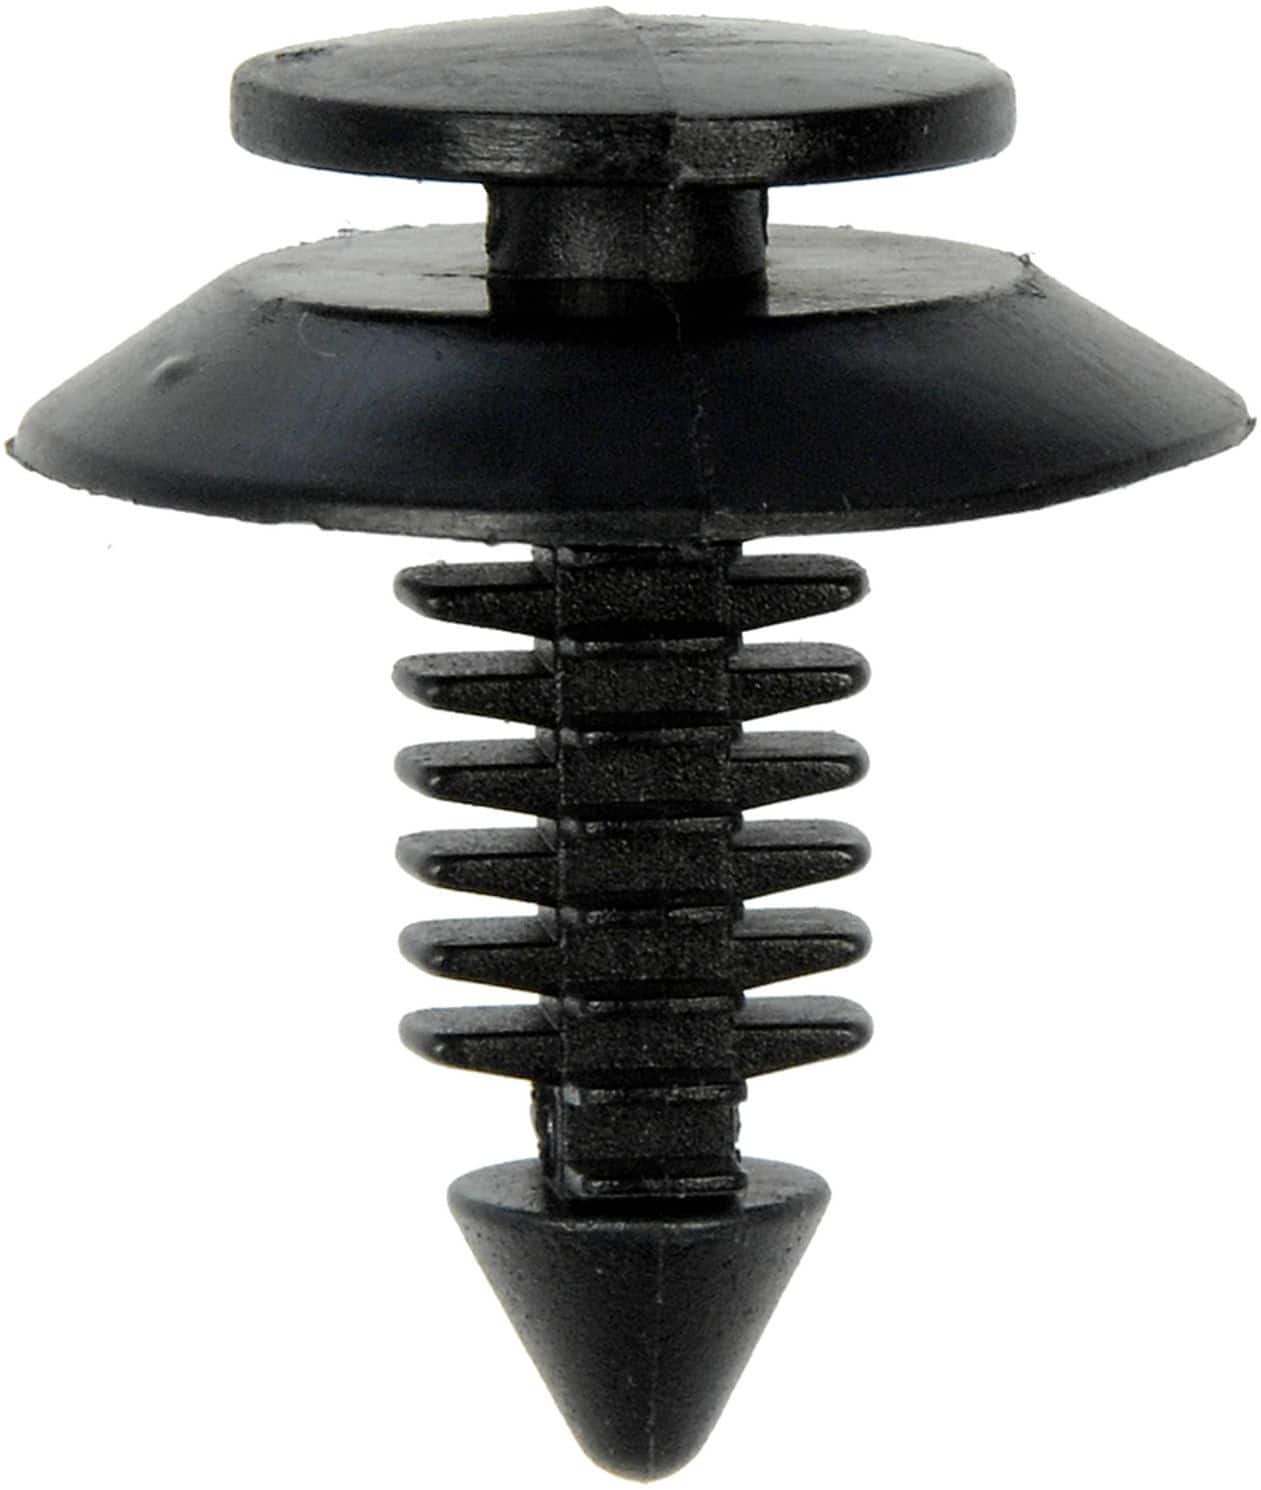 License Plate Screw Kit - Black, OEM Style Fasteners with Nylon Screw  Retainers for Mounting Front and Back License Plates on Cars, SUVs, Trucks  